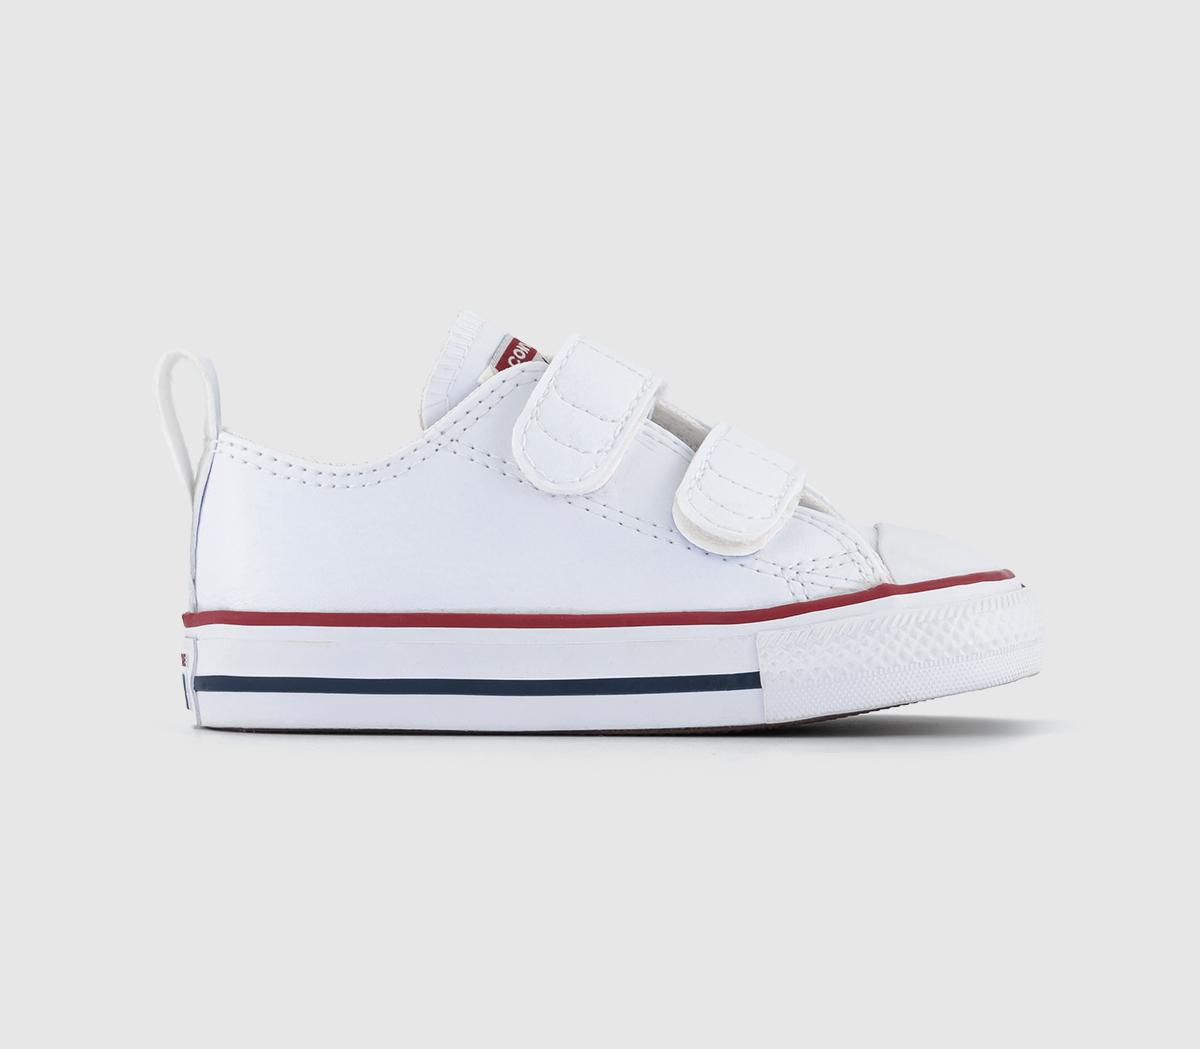 converse all star 2vlace optical white